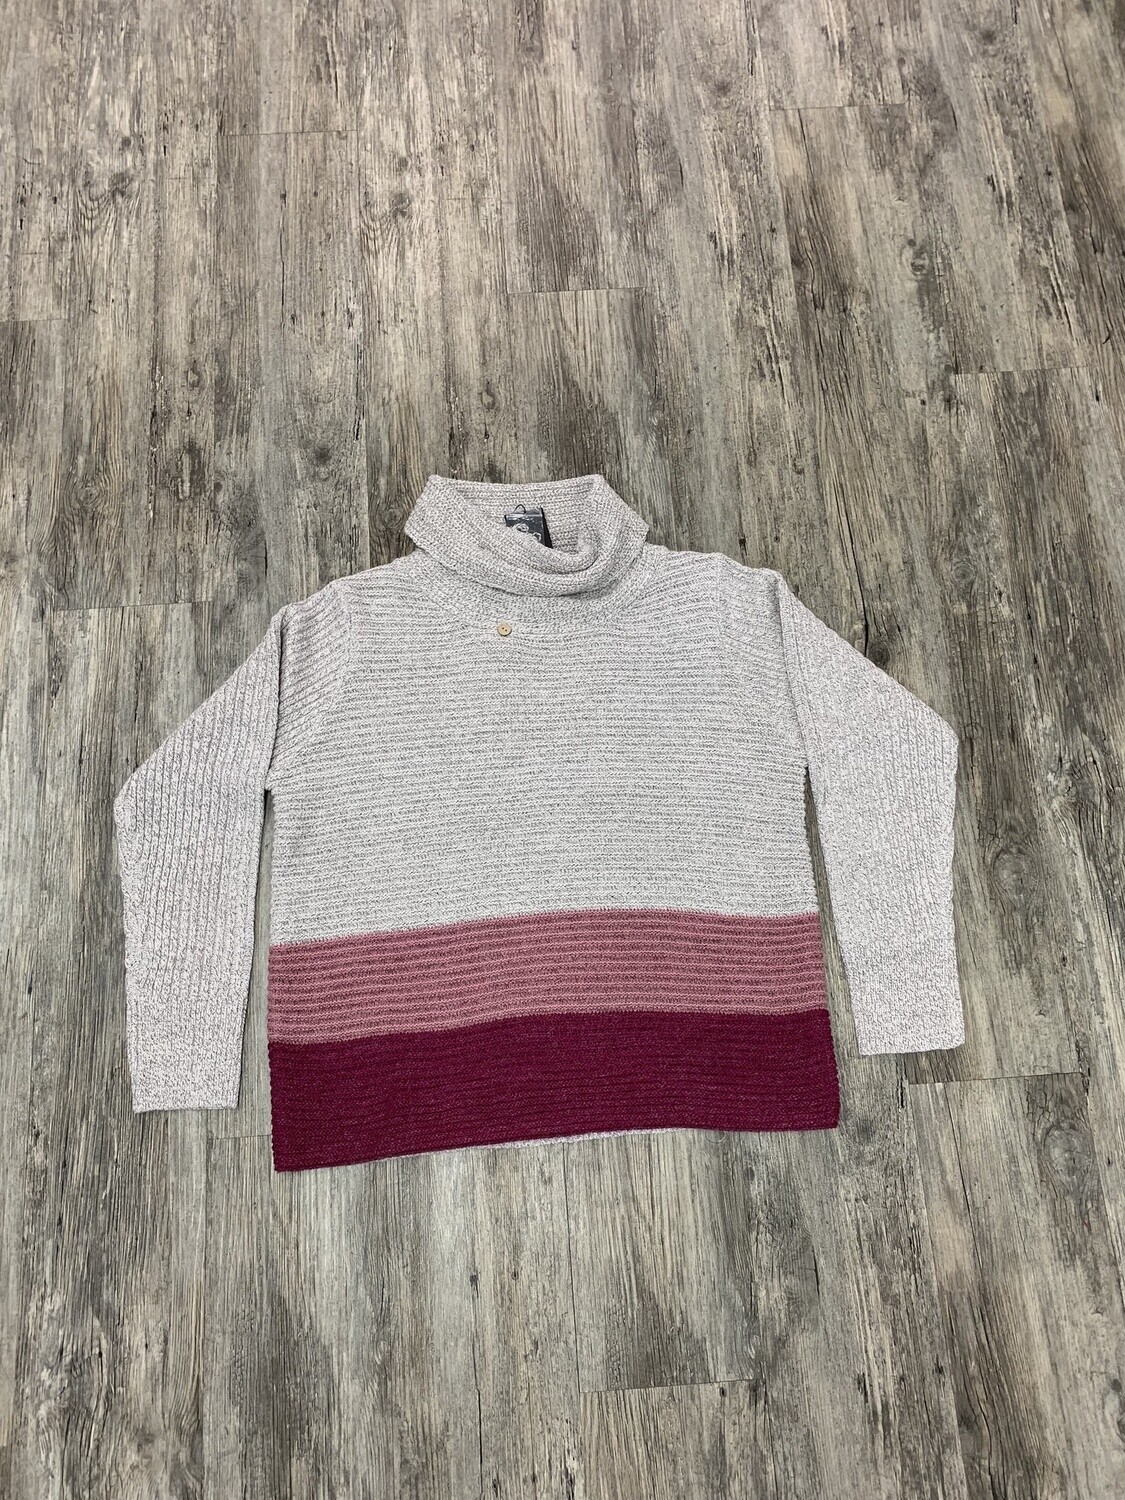 Knit Grey Sweater with Pink Stripes on Bottom #cr4713